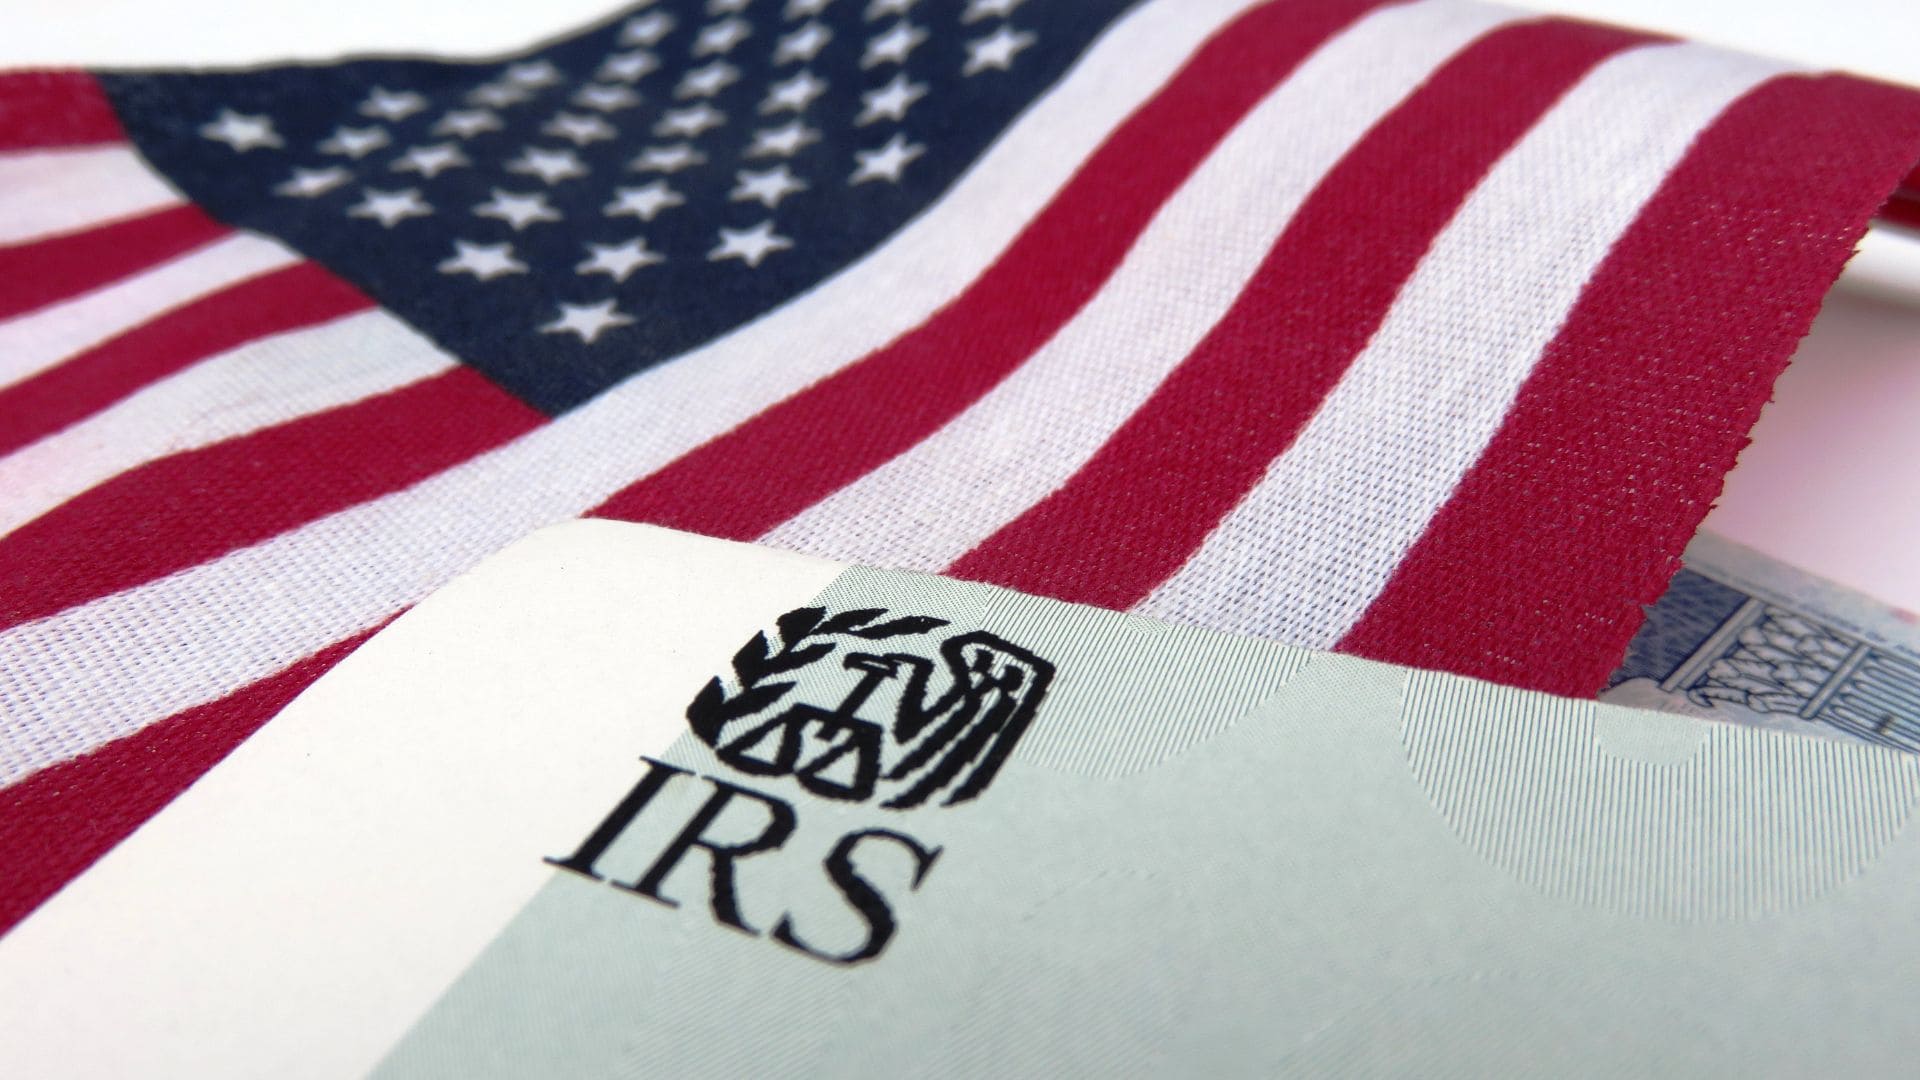 Find out where is your refund in the IRS website if you have it